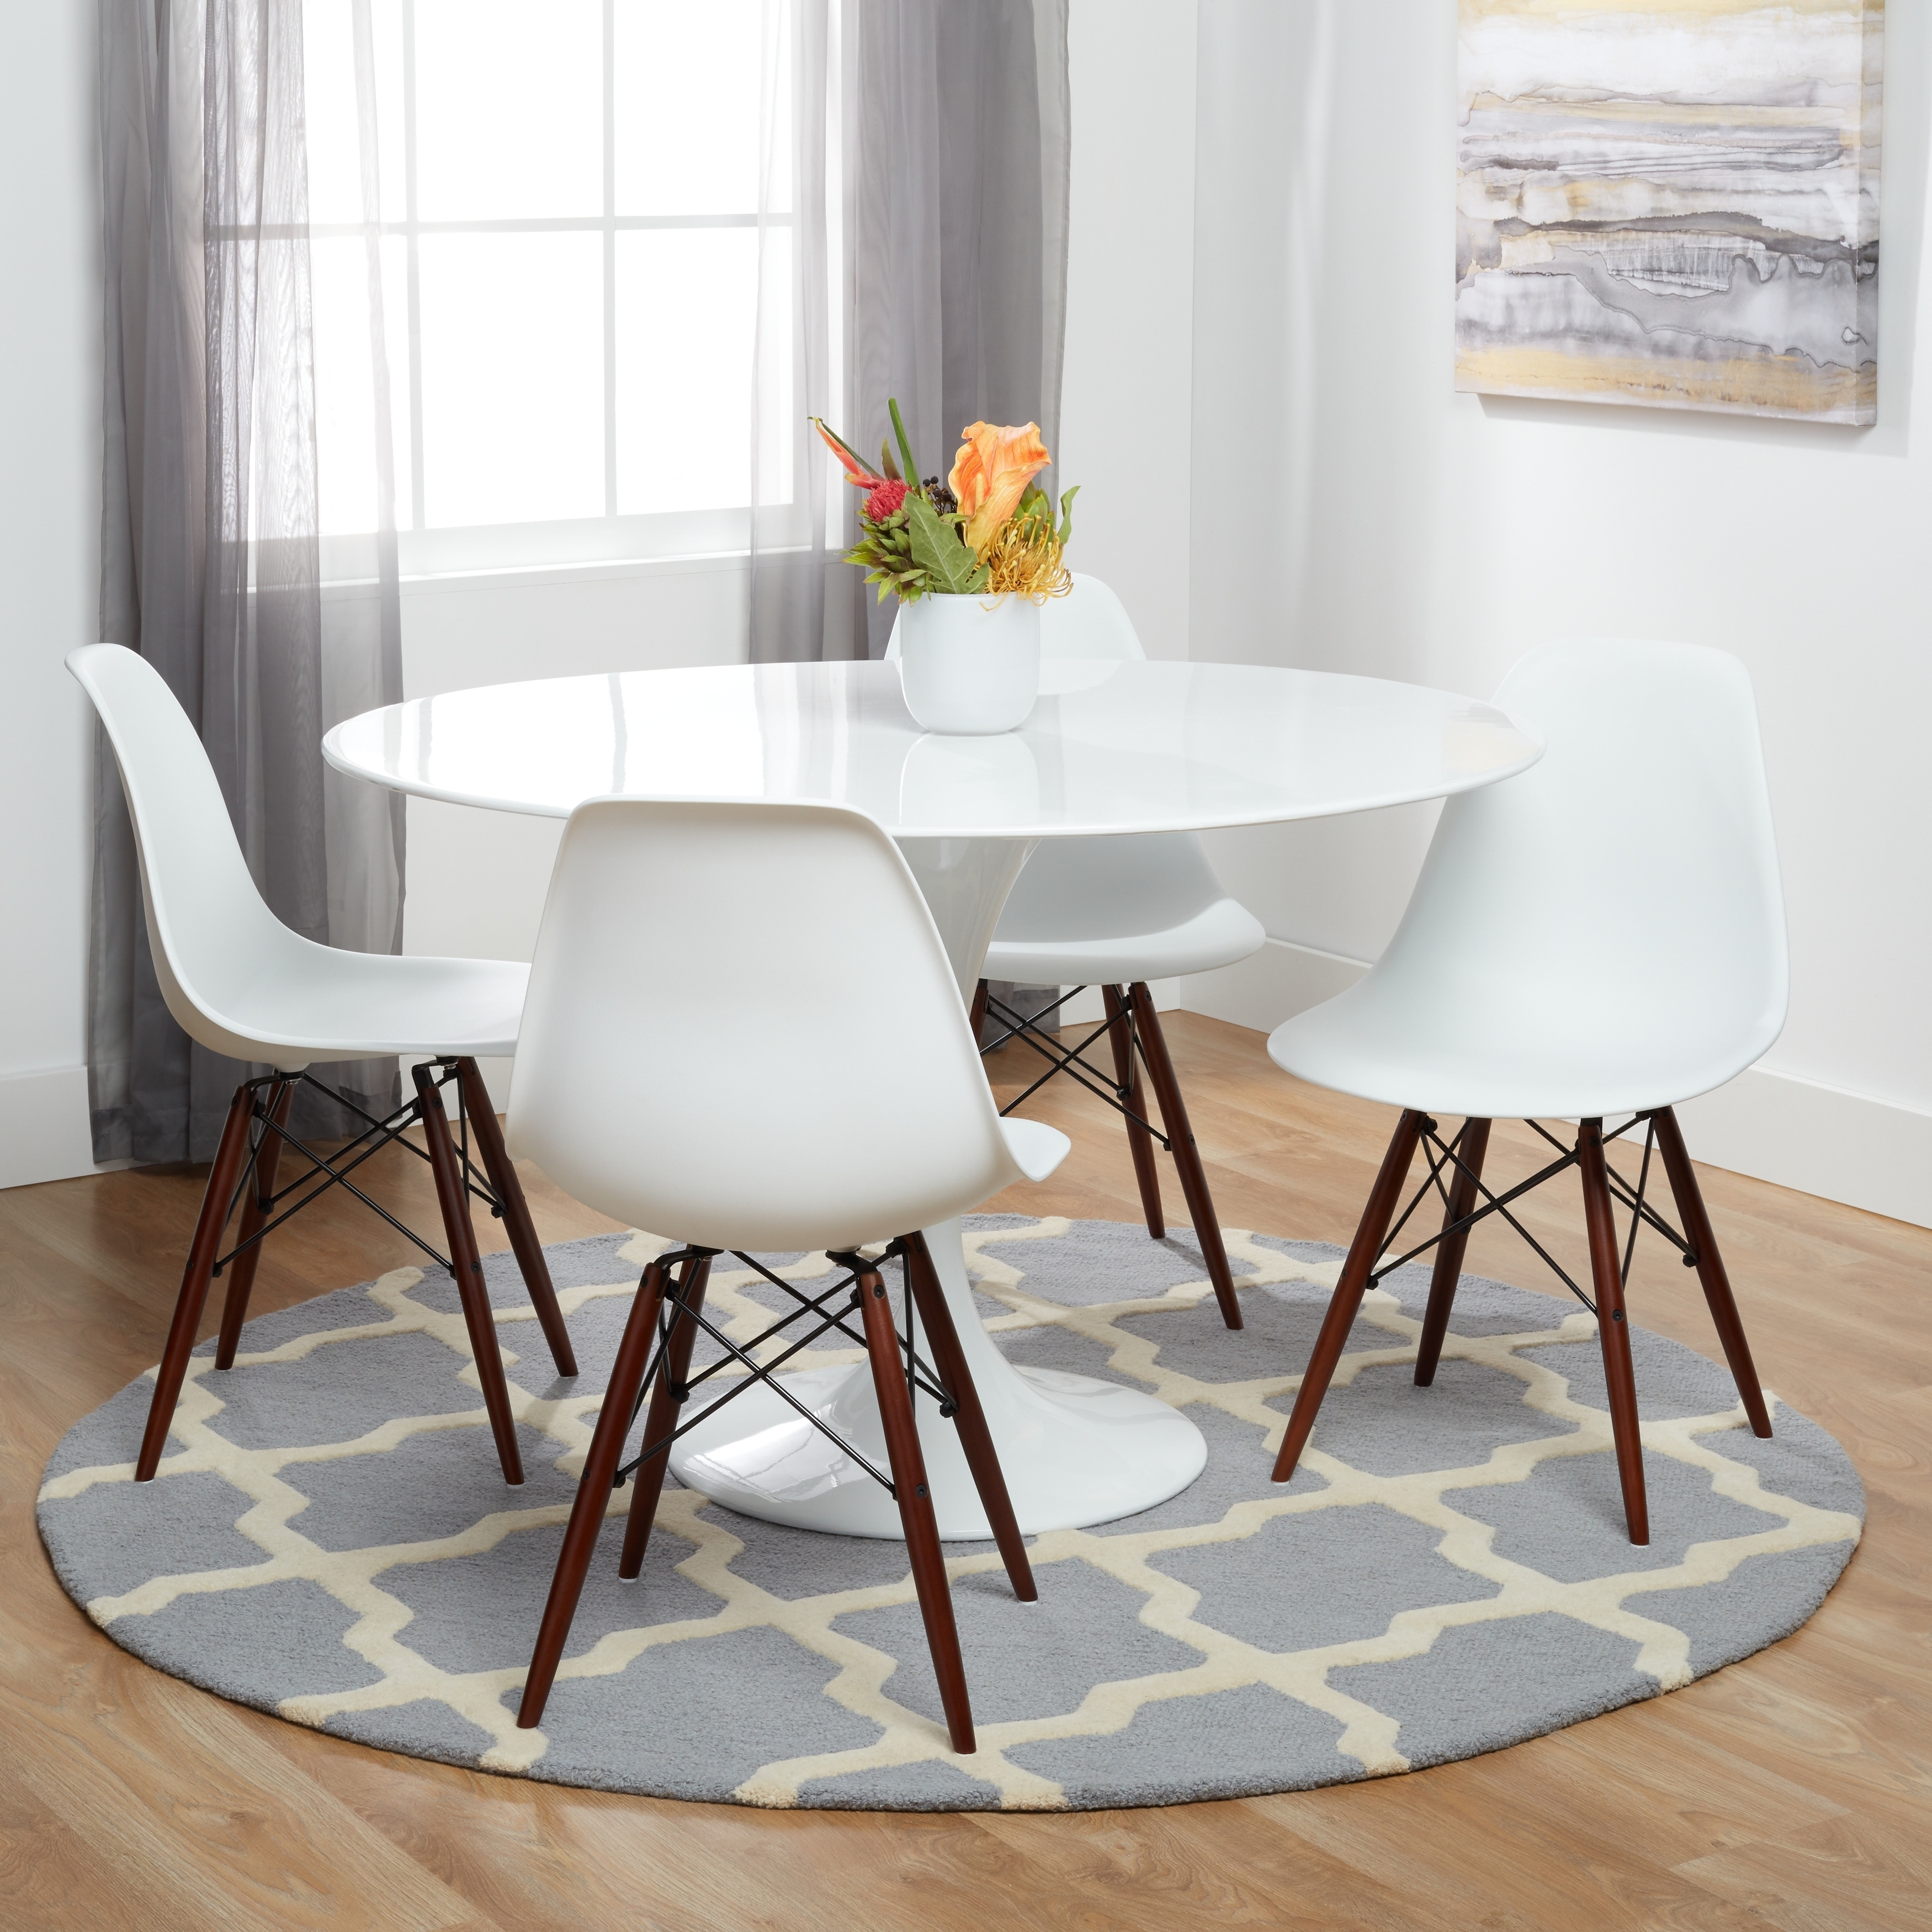 Buy Metal Kitchen Dining Room Chairs Online At Overstock Our